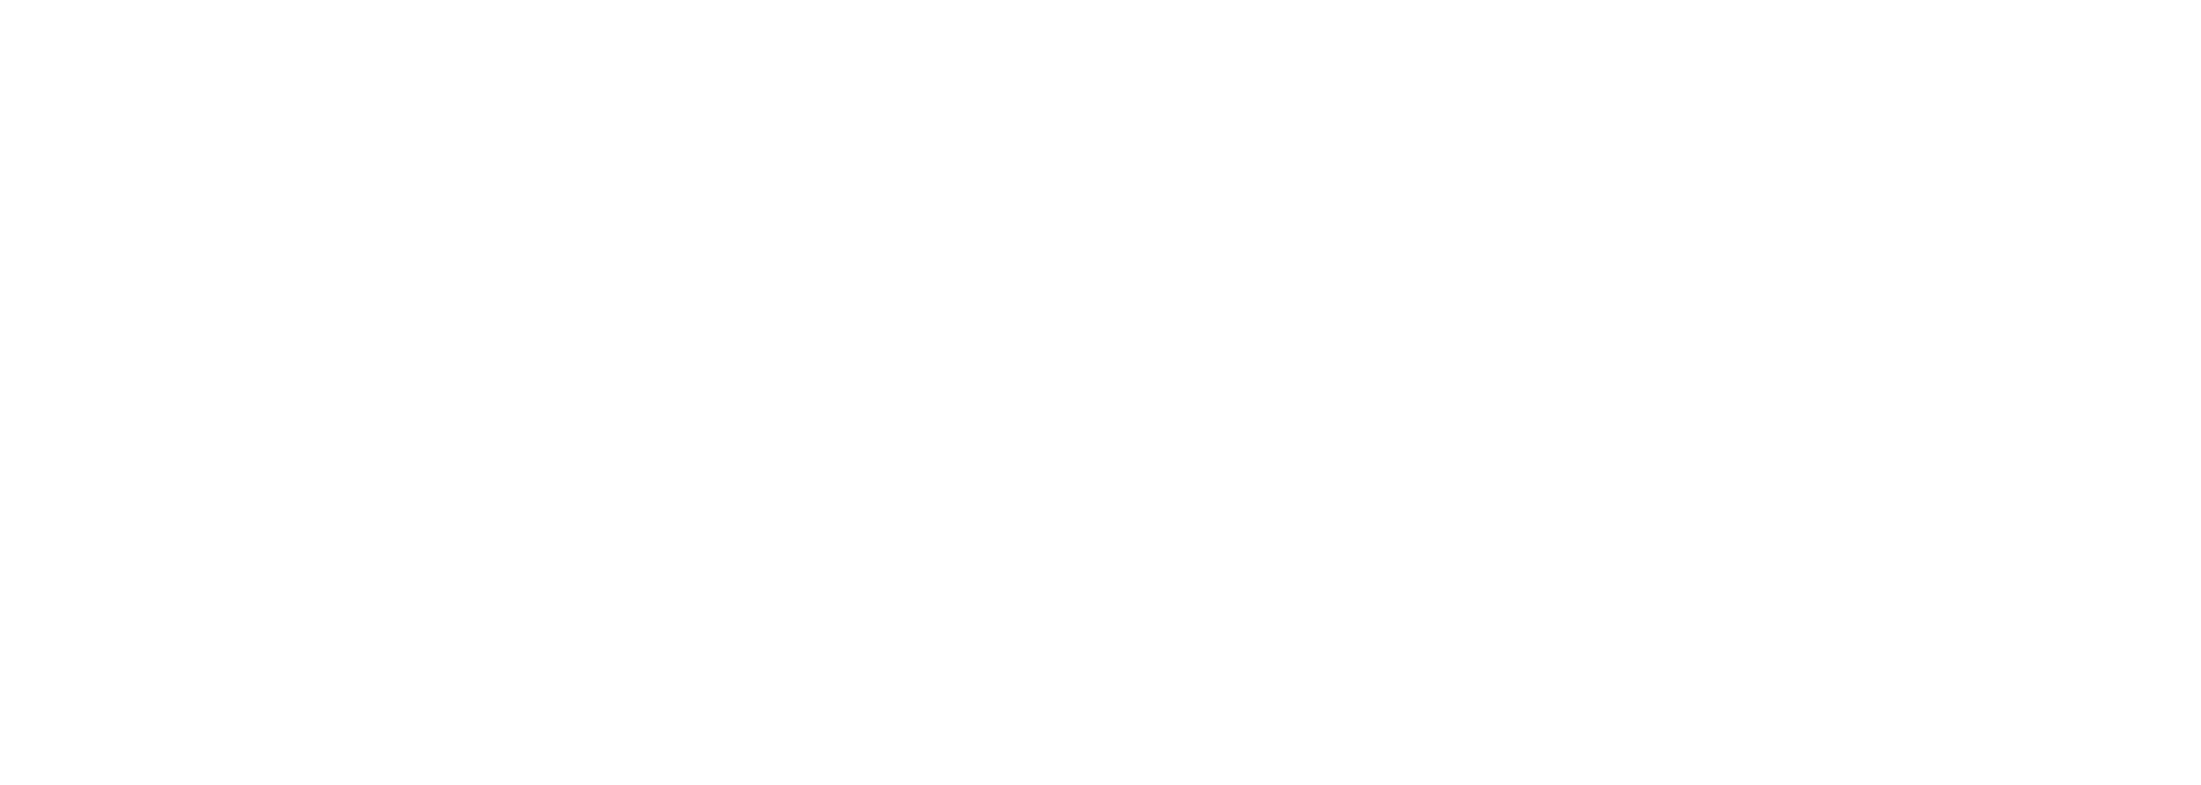 Bath & North East Somerset Council Jobs and Careers